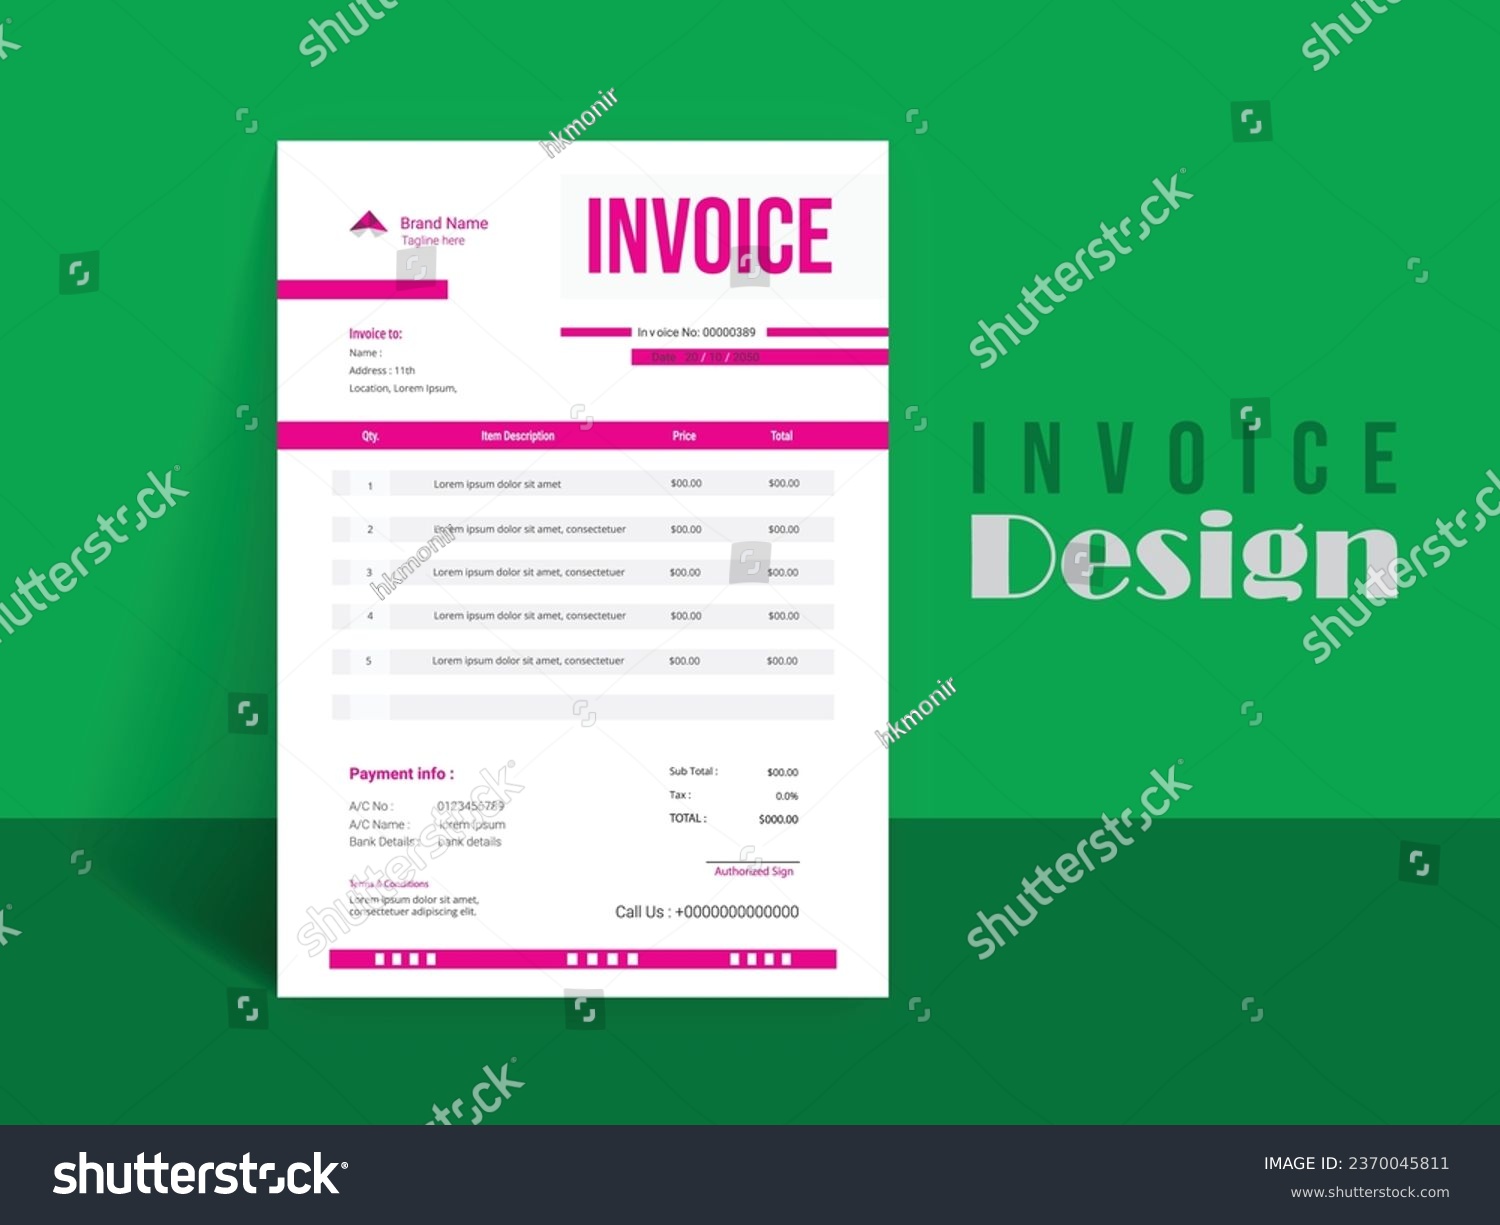 Invoice Design. Business invoice form template. Invoicing quotes, money bills or pricelist and payment agreement design templates. Tax form, 
bill graphic or payment receipt. #2370045811